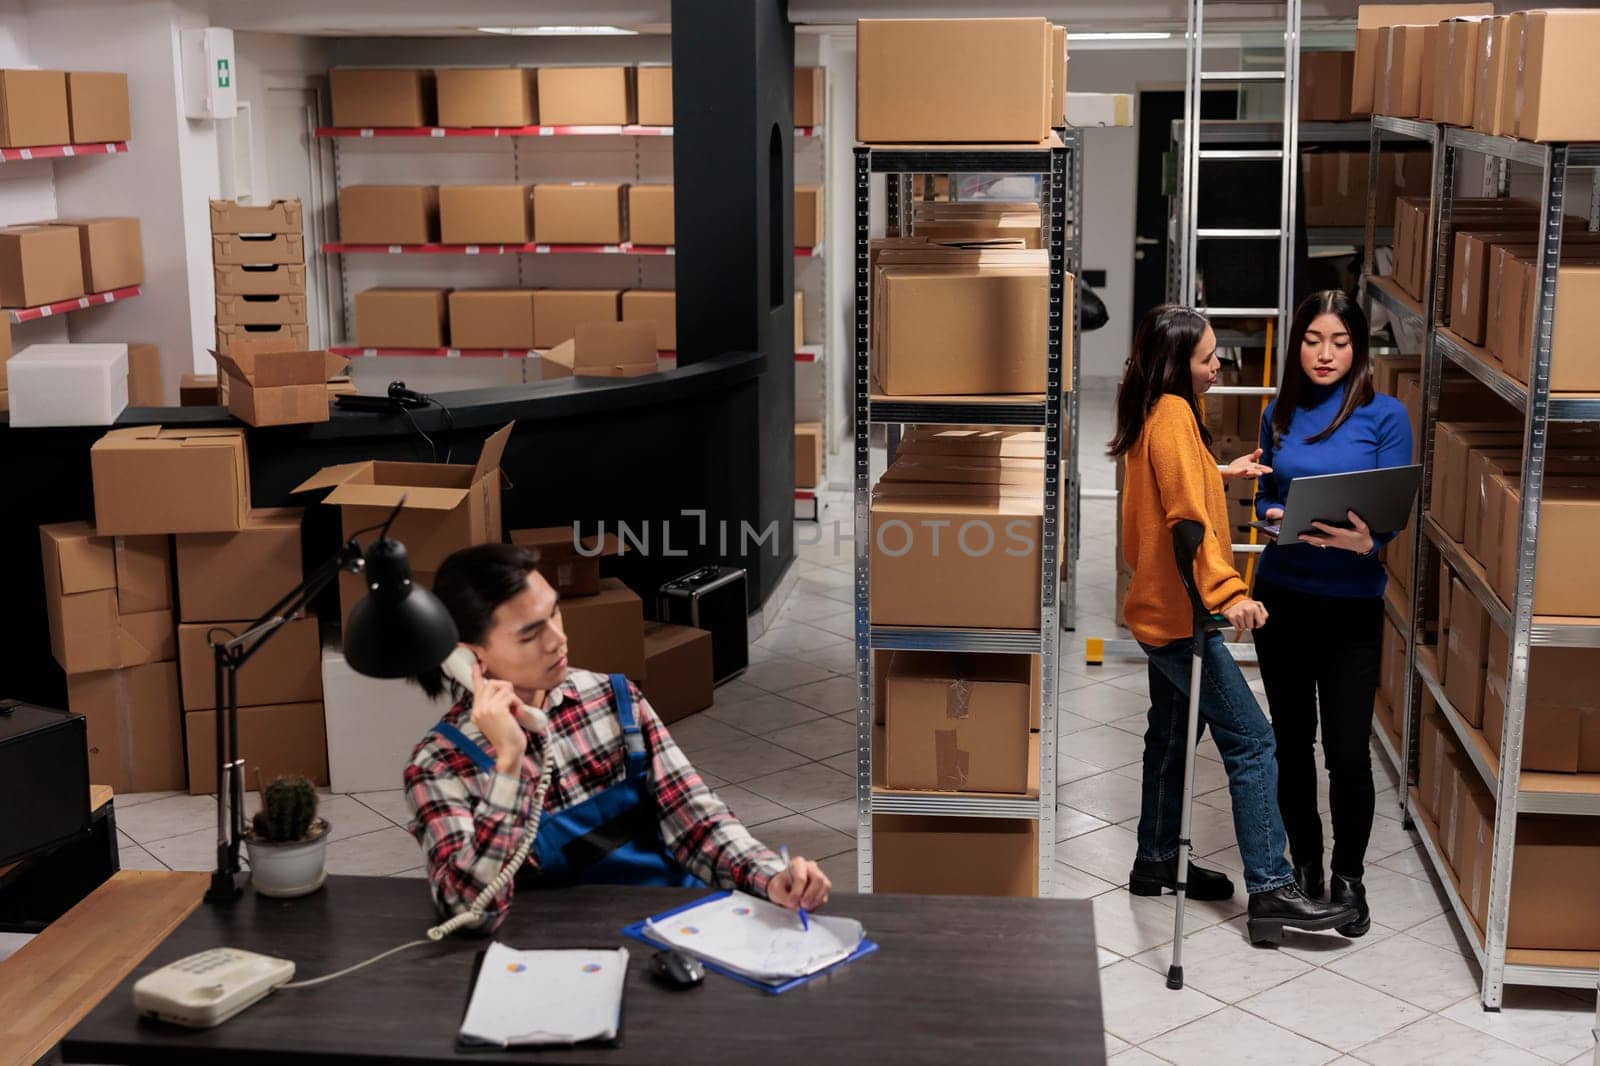 Delivery operators managing warehouse product audit in storage room by DCStudio